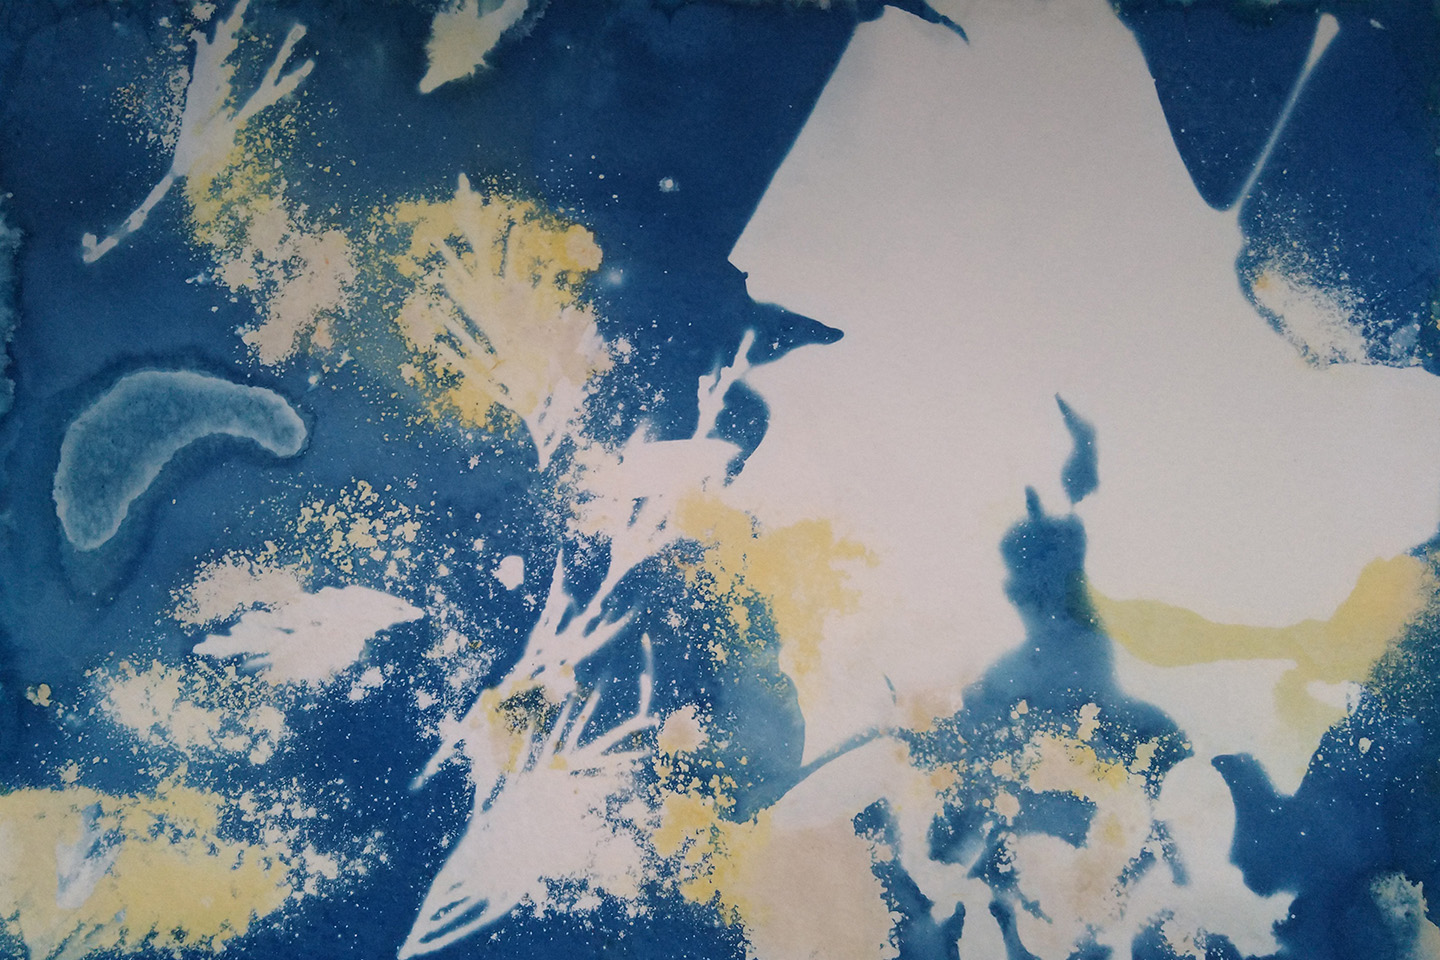 Cyanotype produced as part of Caitriona Dunnetts's workshops at the Yemeni Community Centre 